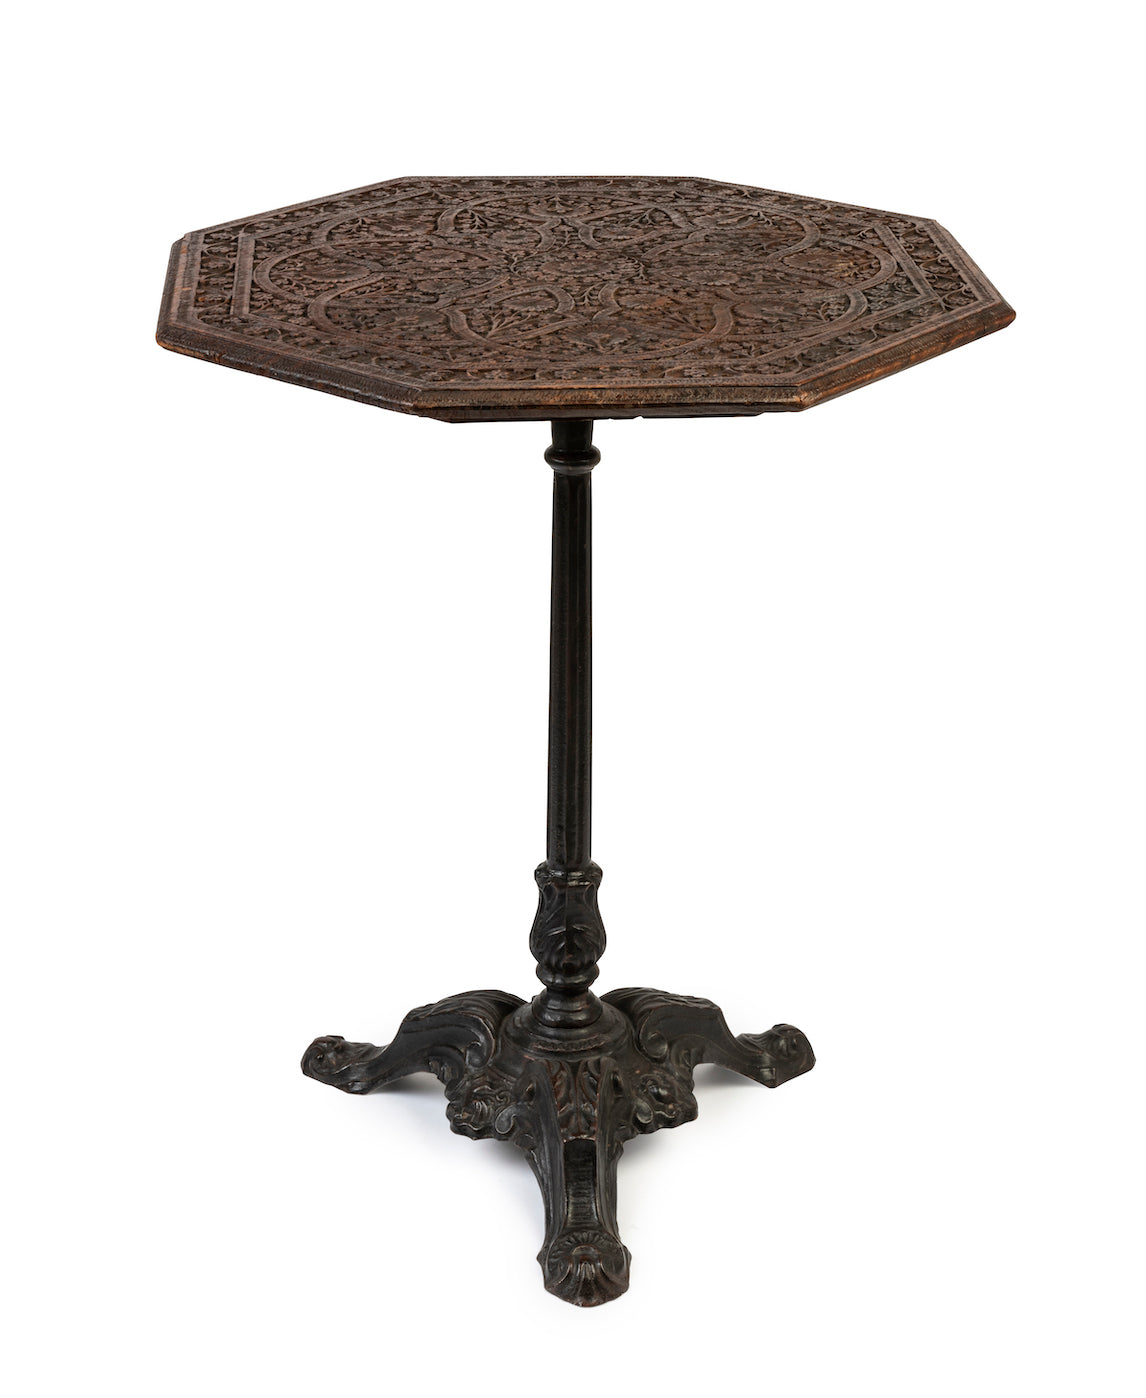 SOLD A fine Kashmiri carved octagonal occasional table with cast iron base, Anglo-Indian 19th Century